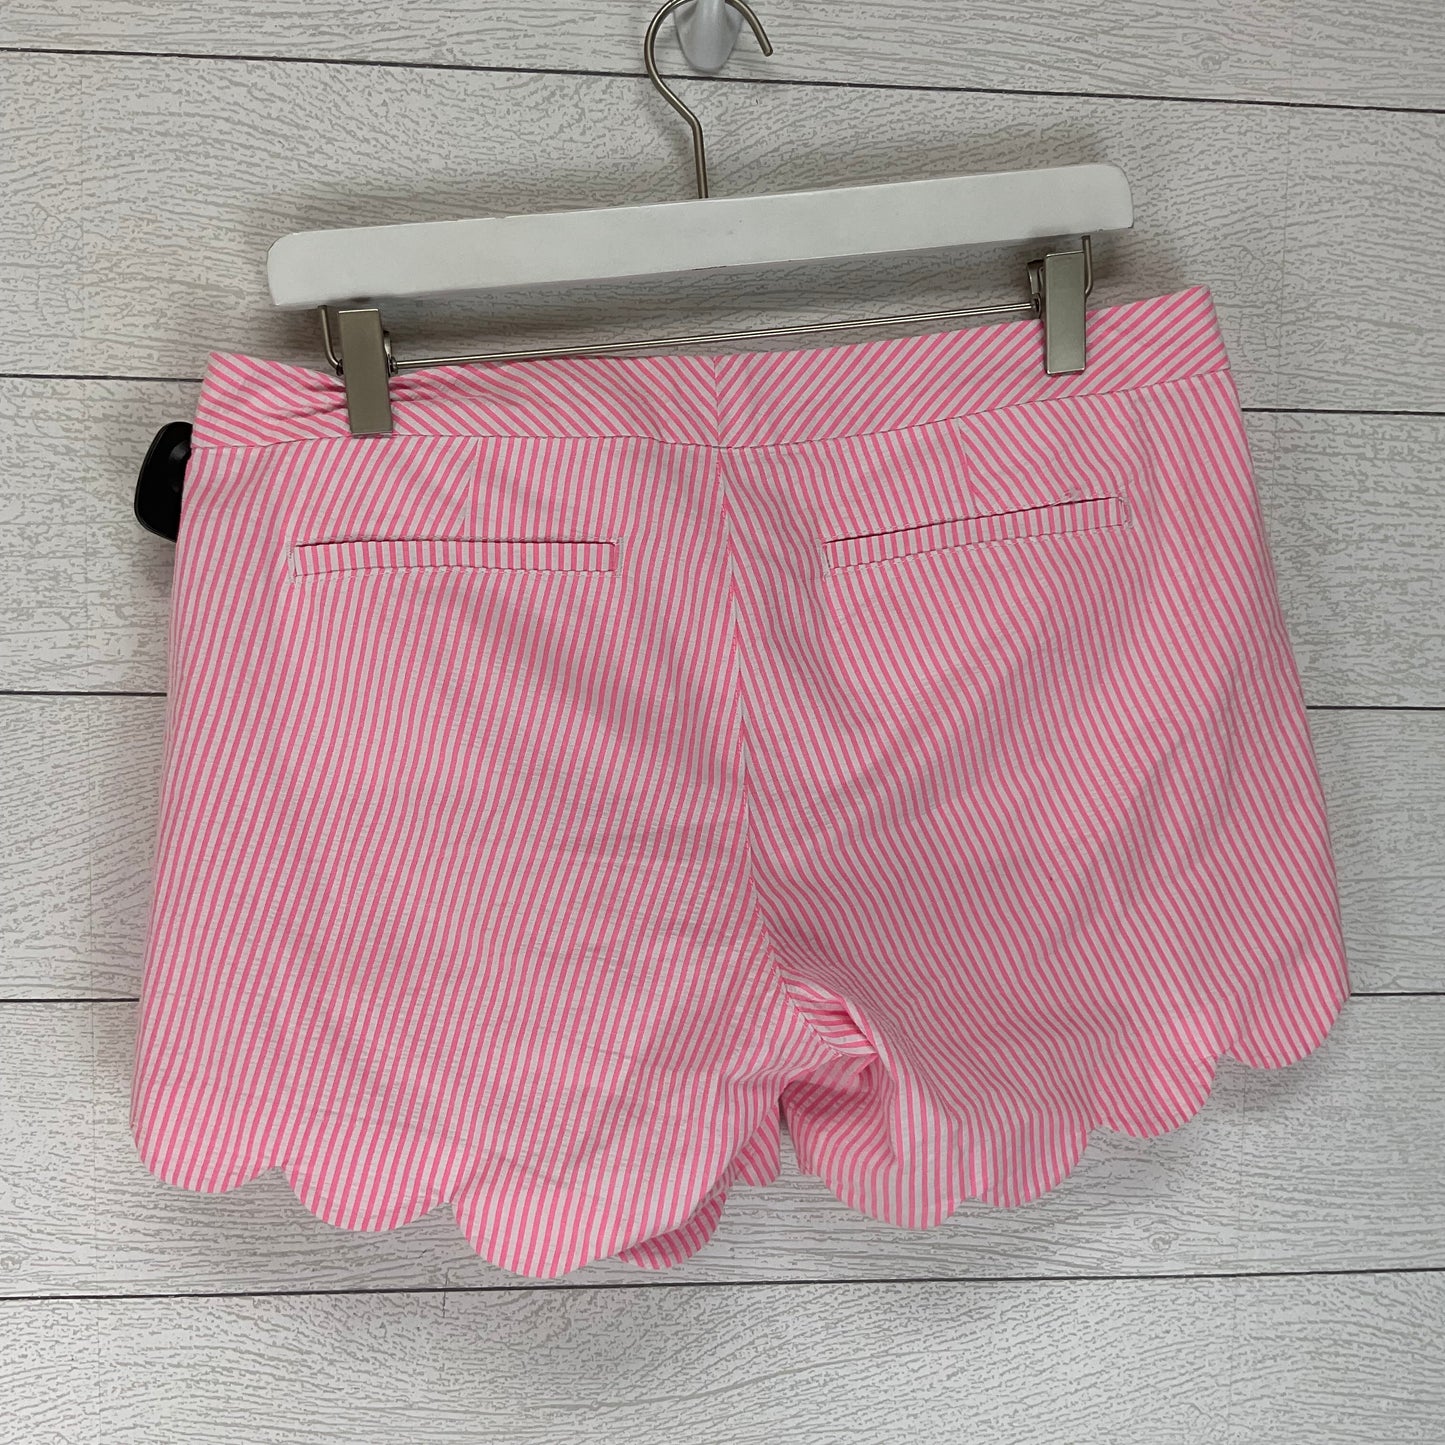 Pink Shorts Lilly Pulitzer, Size 6